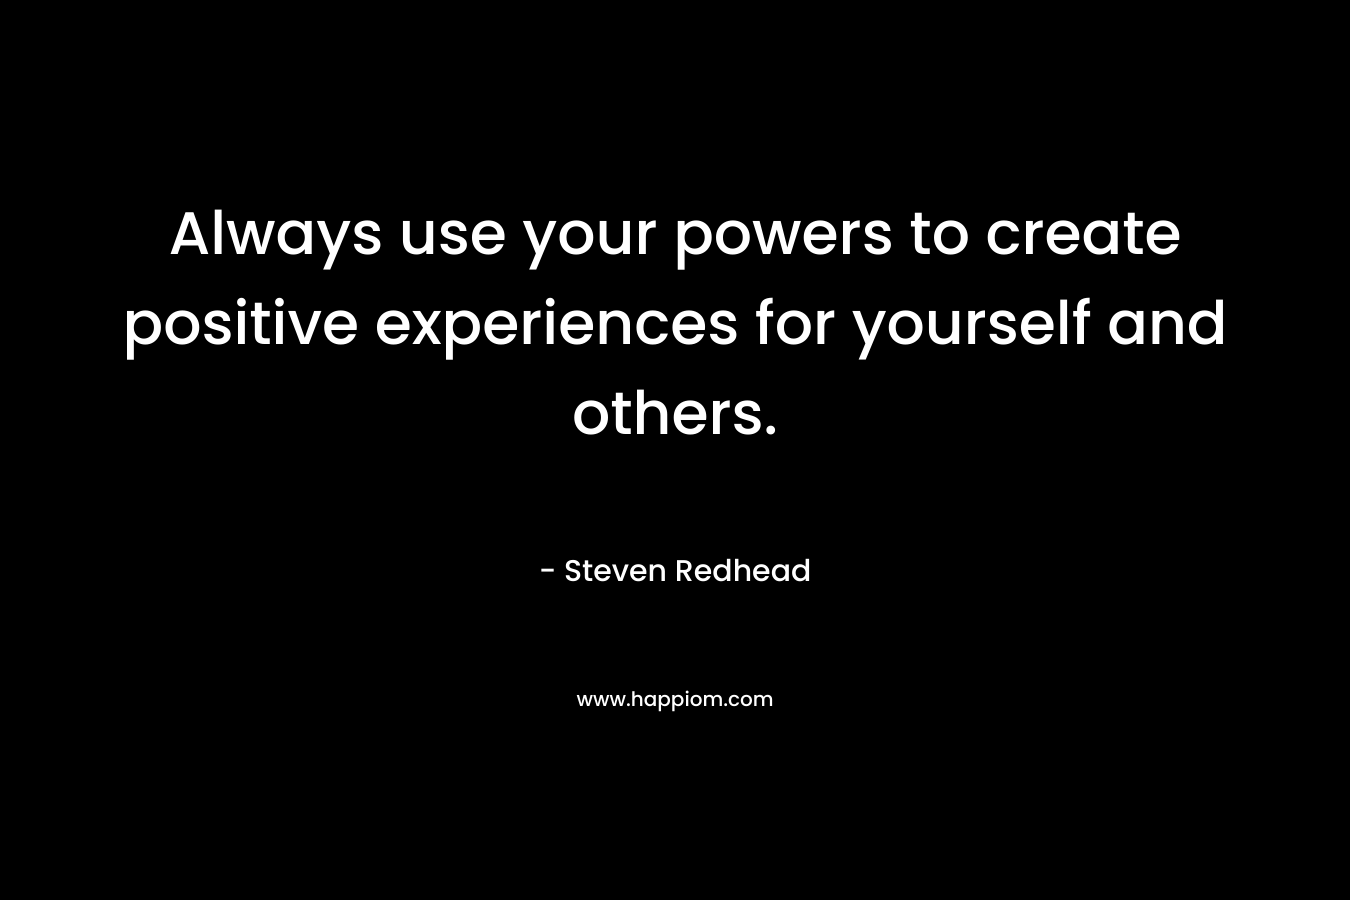 Always use your powers to create positive experiences for yourself and others.